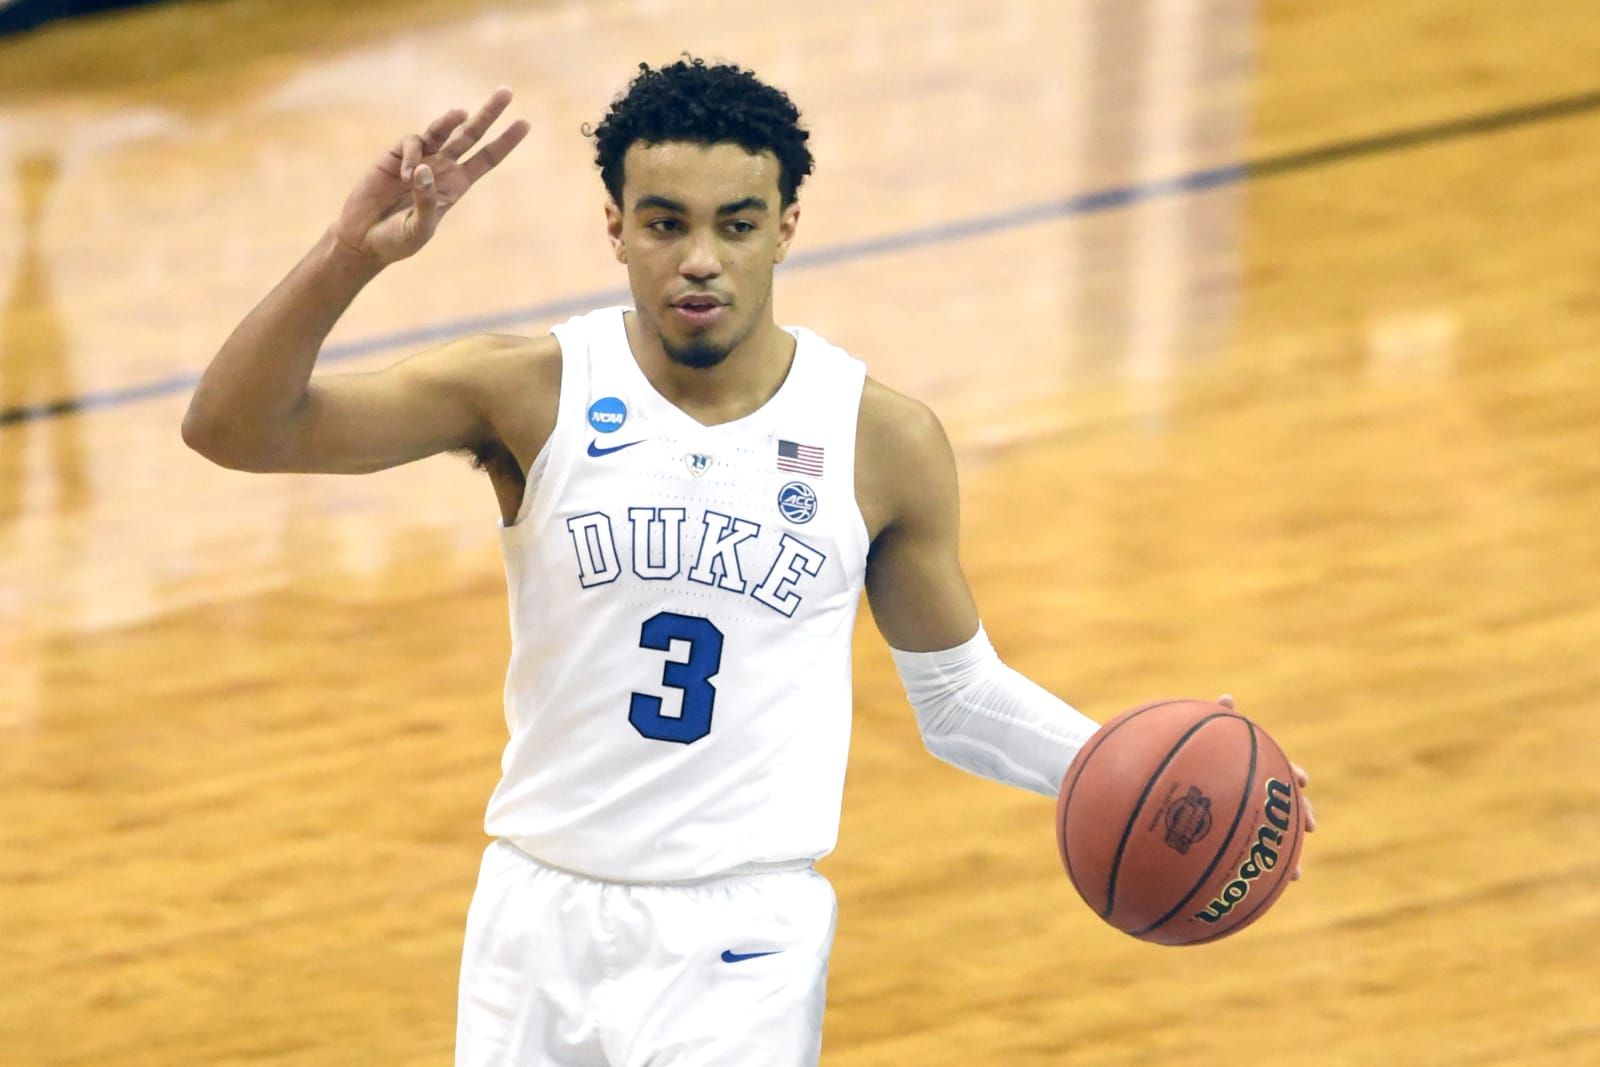 Winners and losers from the NBA Draft declarations